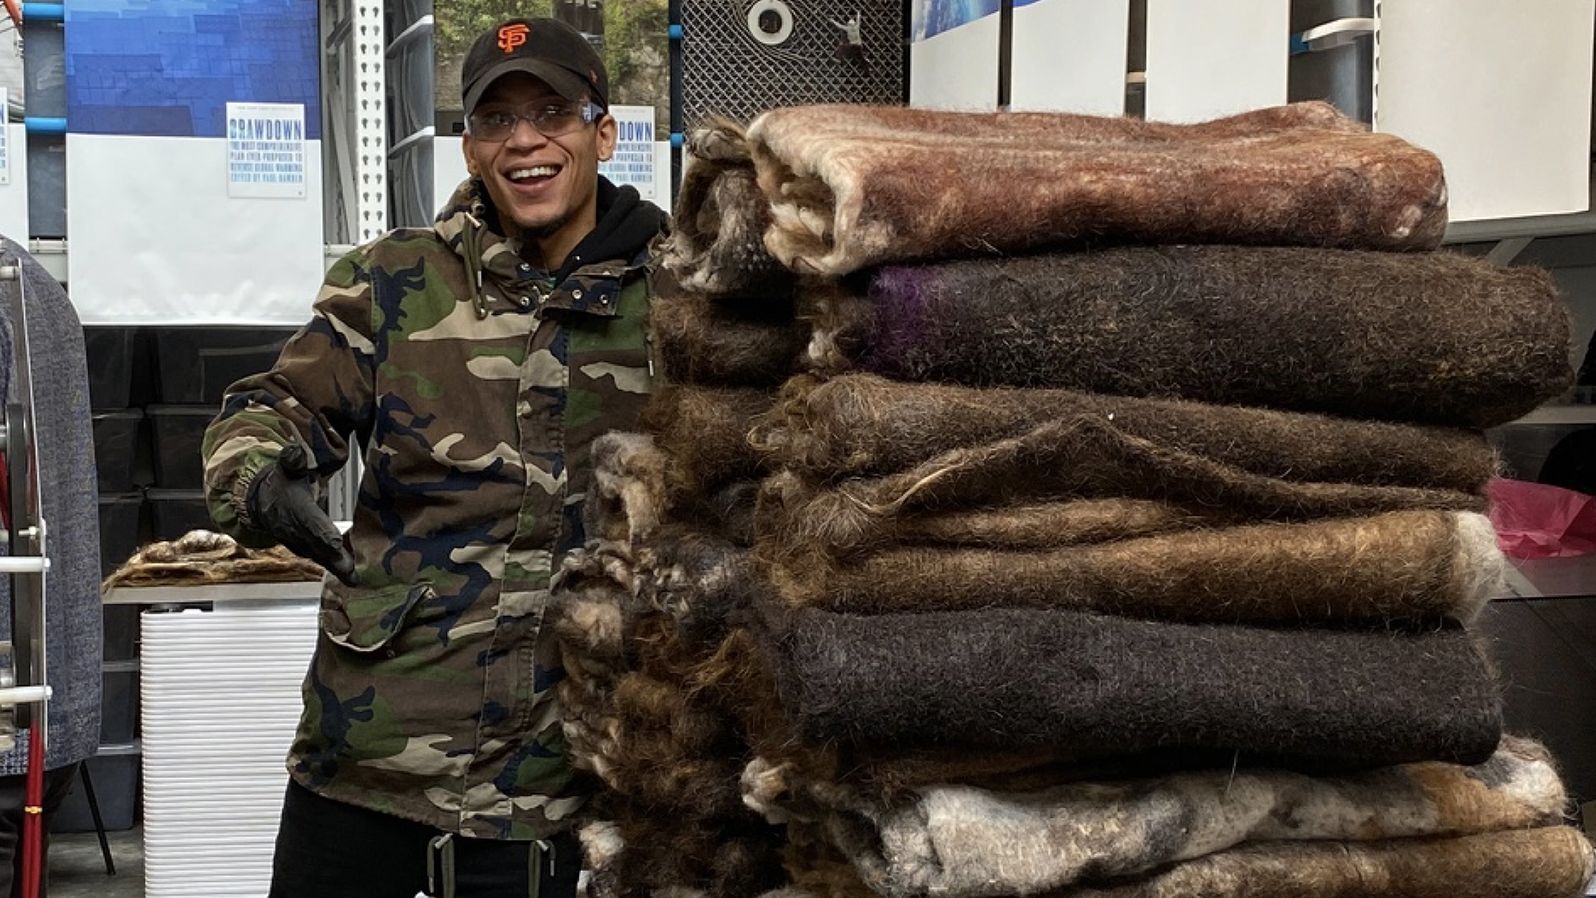 Human hair and animal fur is sent to Matter of Trust's San Francisco warehouse, and made into mats for cleaning up oil spills.